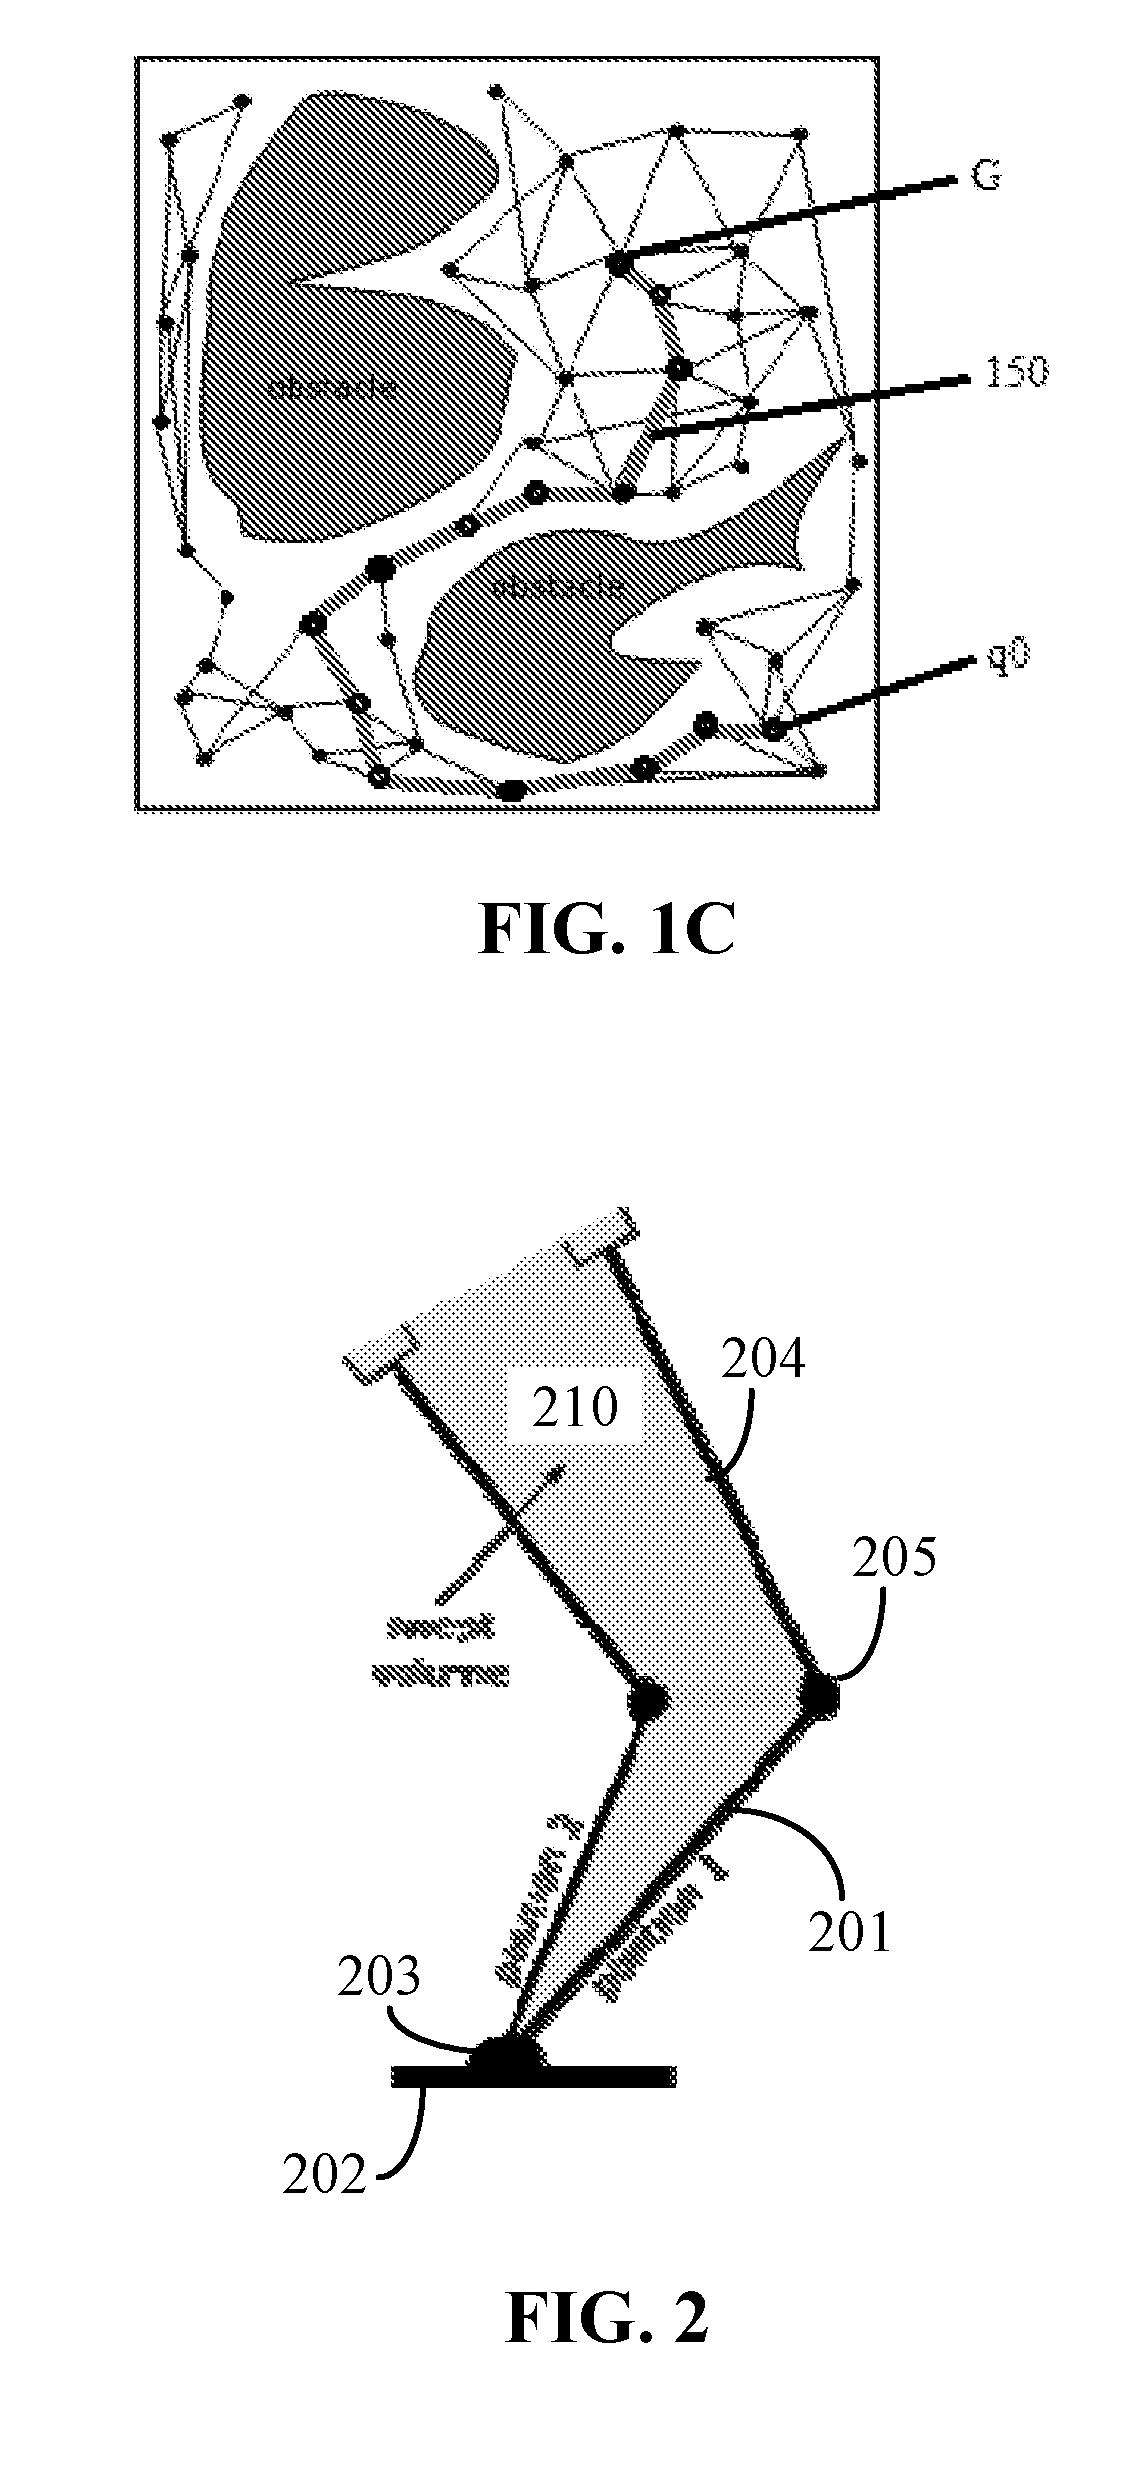 Specialized robot motion planning hardware and methods of making and using same